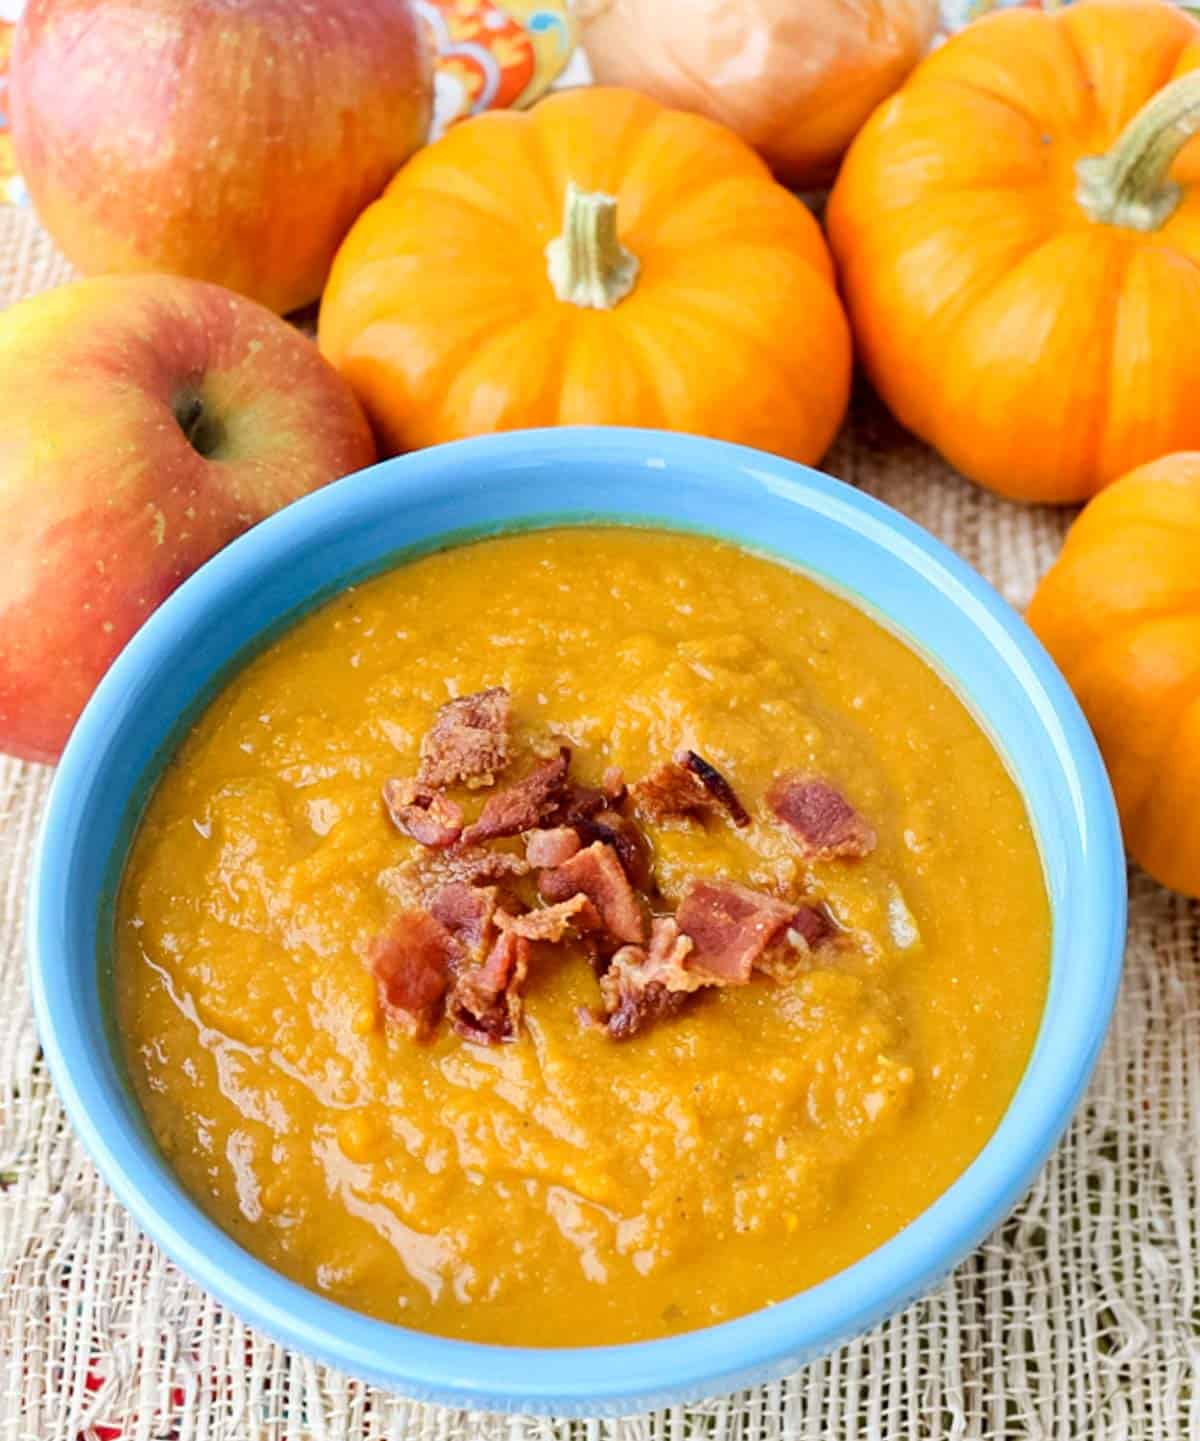 blue bowl of soup sprinkled with bacon next to apples and small pumpkins